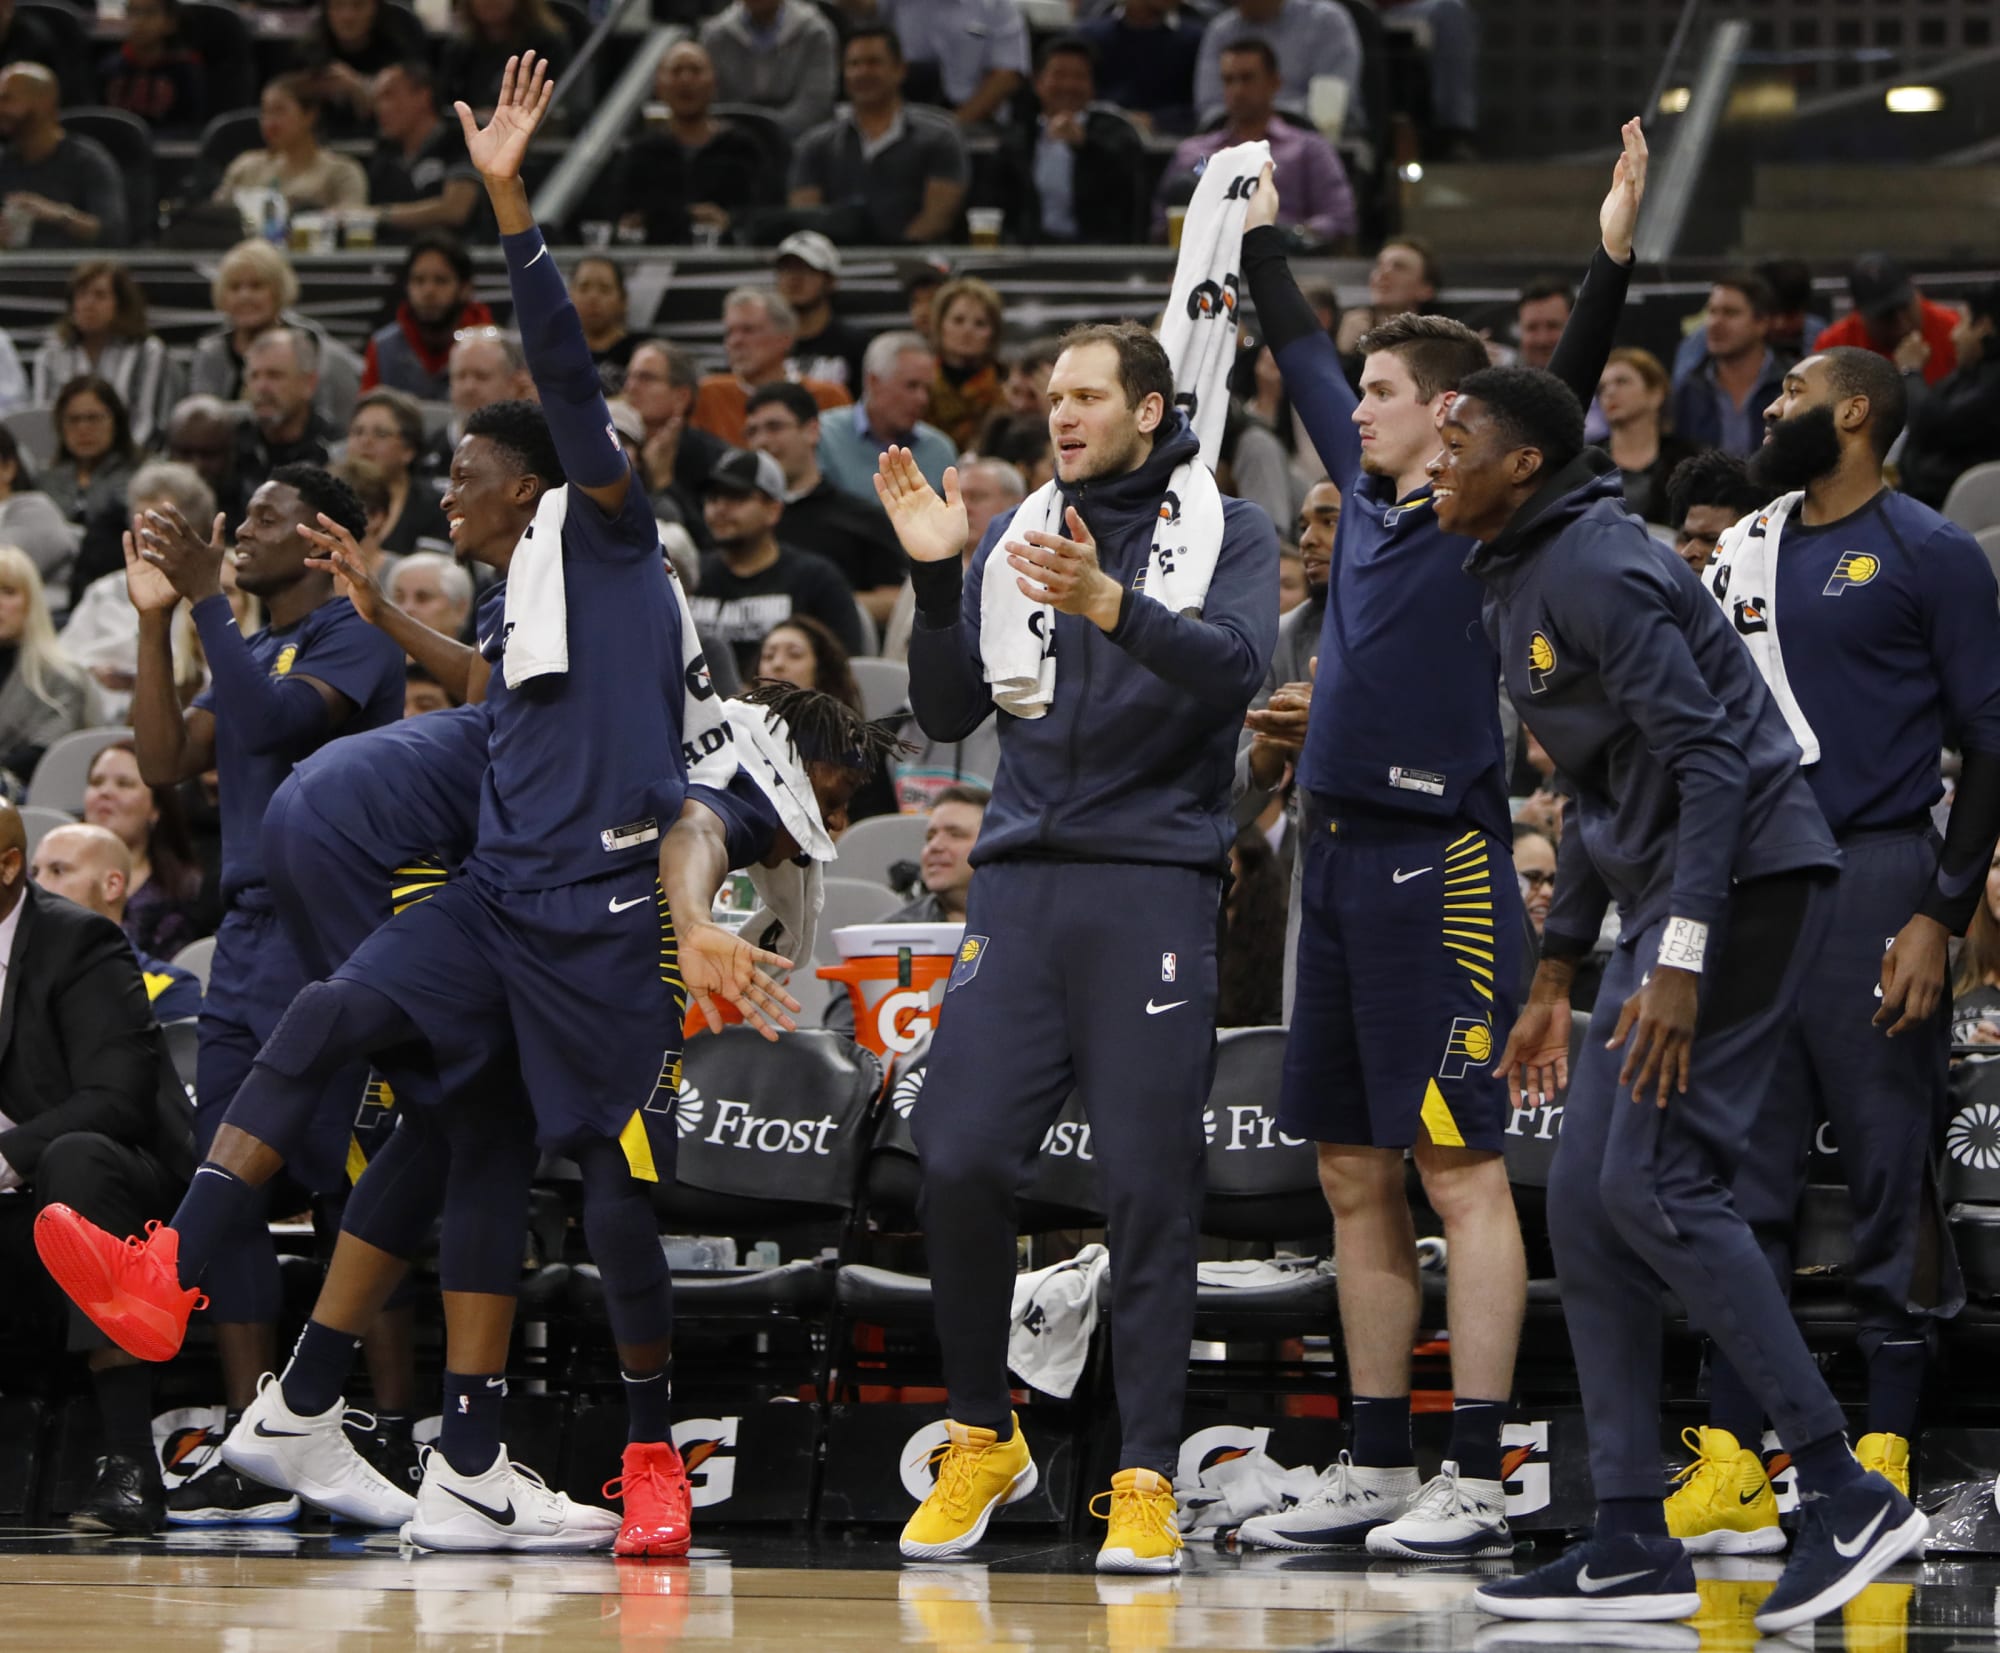 3 key stats for the Indiana Pacers after two successful weeks